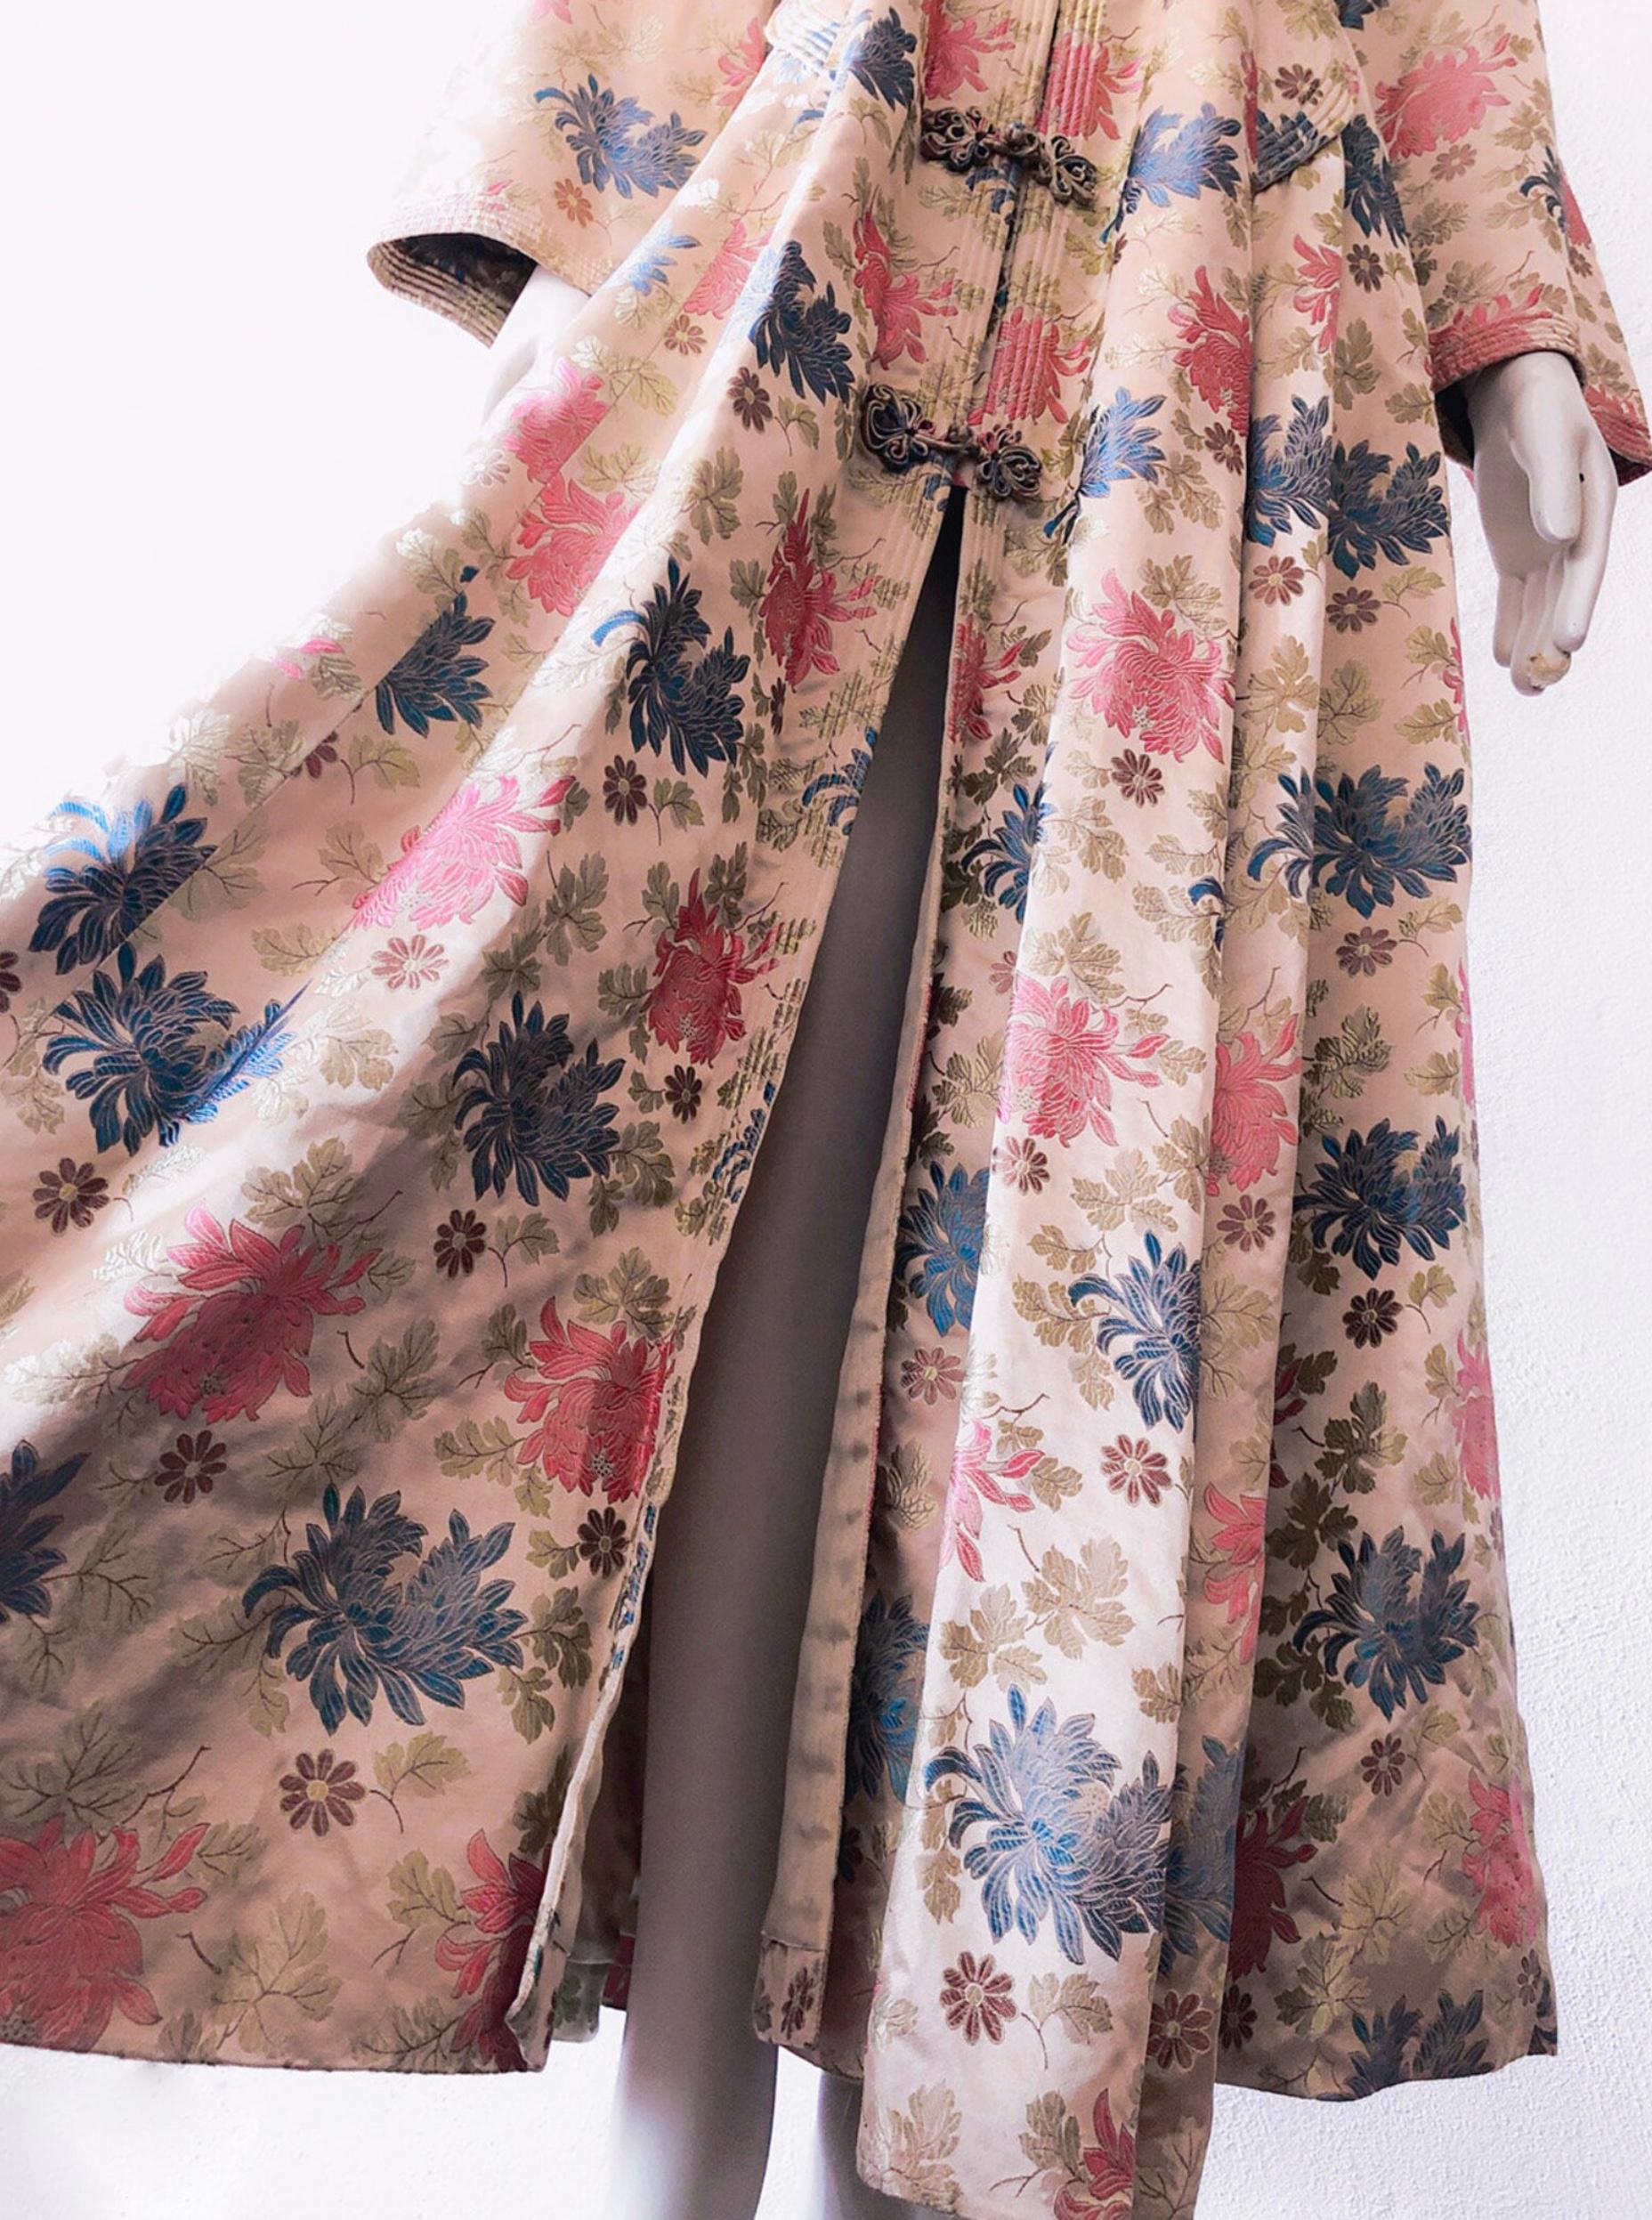 Beautiful Vintage Silk Kimono Dress Gown 1950s Couture Asian Robe Coat 40s 50s For Sale 1